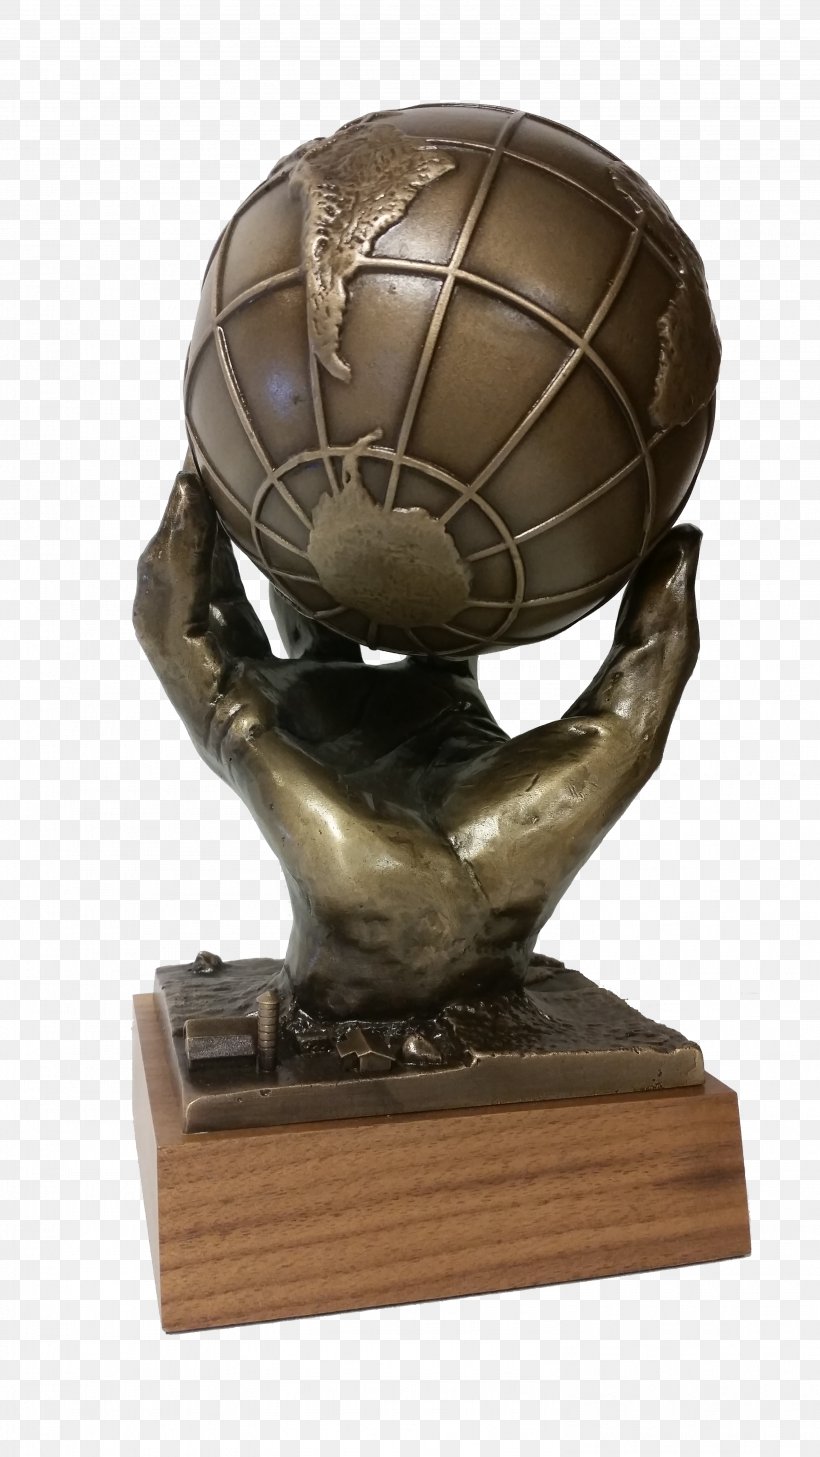 Trophy Protective Gear In Sports Sculpture Award, PNG, 2988x5312px, Trophy, Agriculture, Award, Protective Gear In Sports, Sculpture Download Free